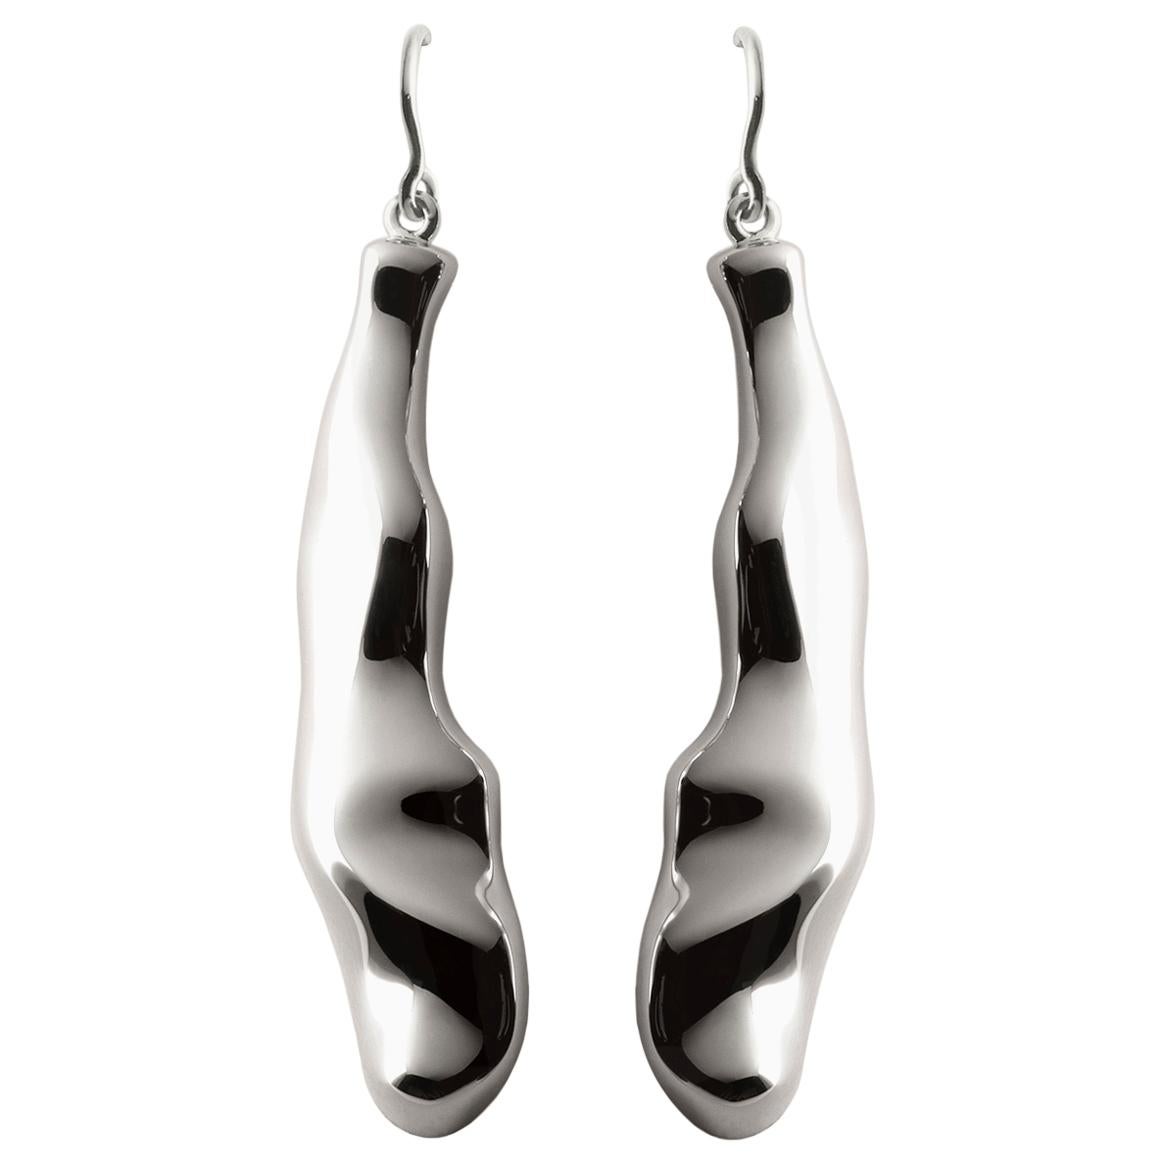 Nathalie Jean Contemporary Rhodium Plated Silver Drop Dangle Sculpture Earrings